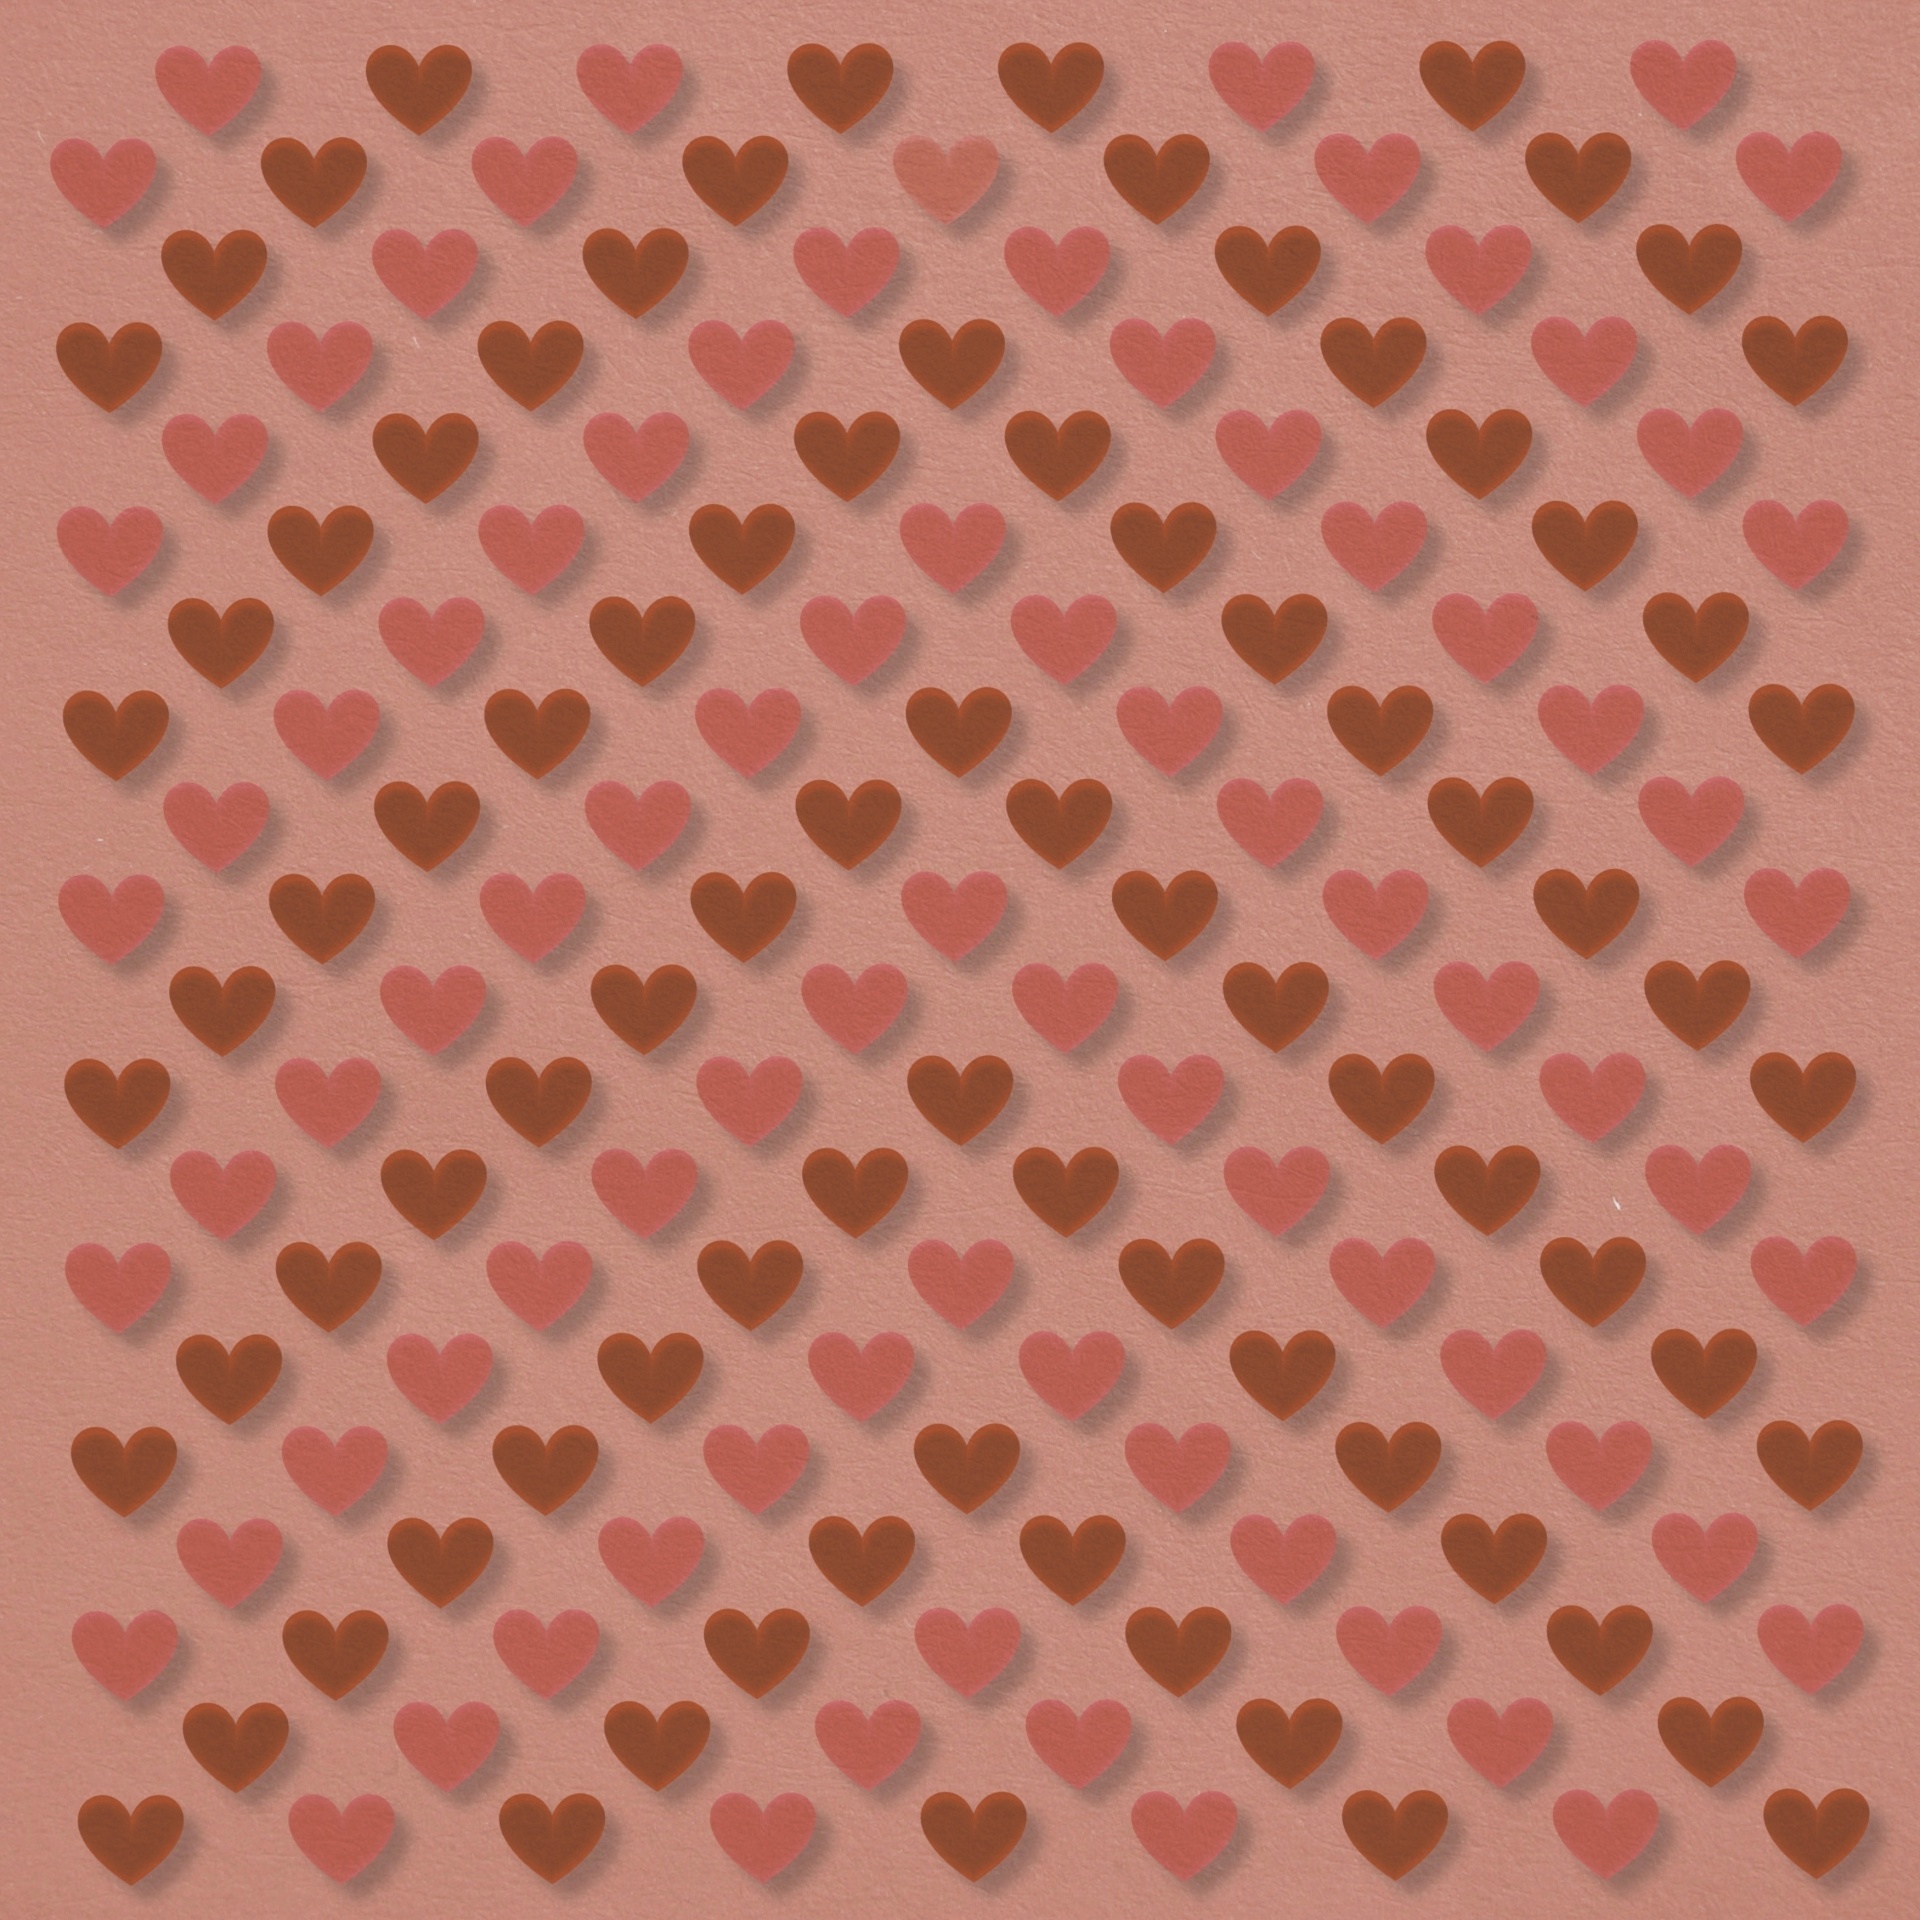 Hearts Background Pattern Texture